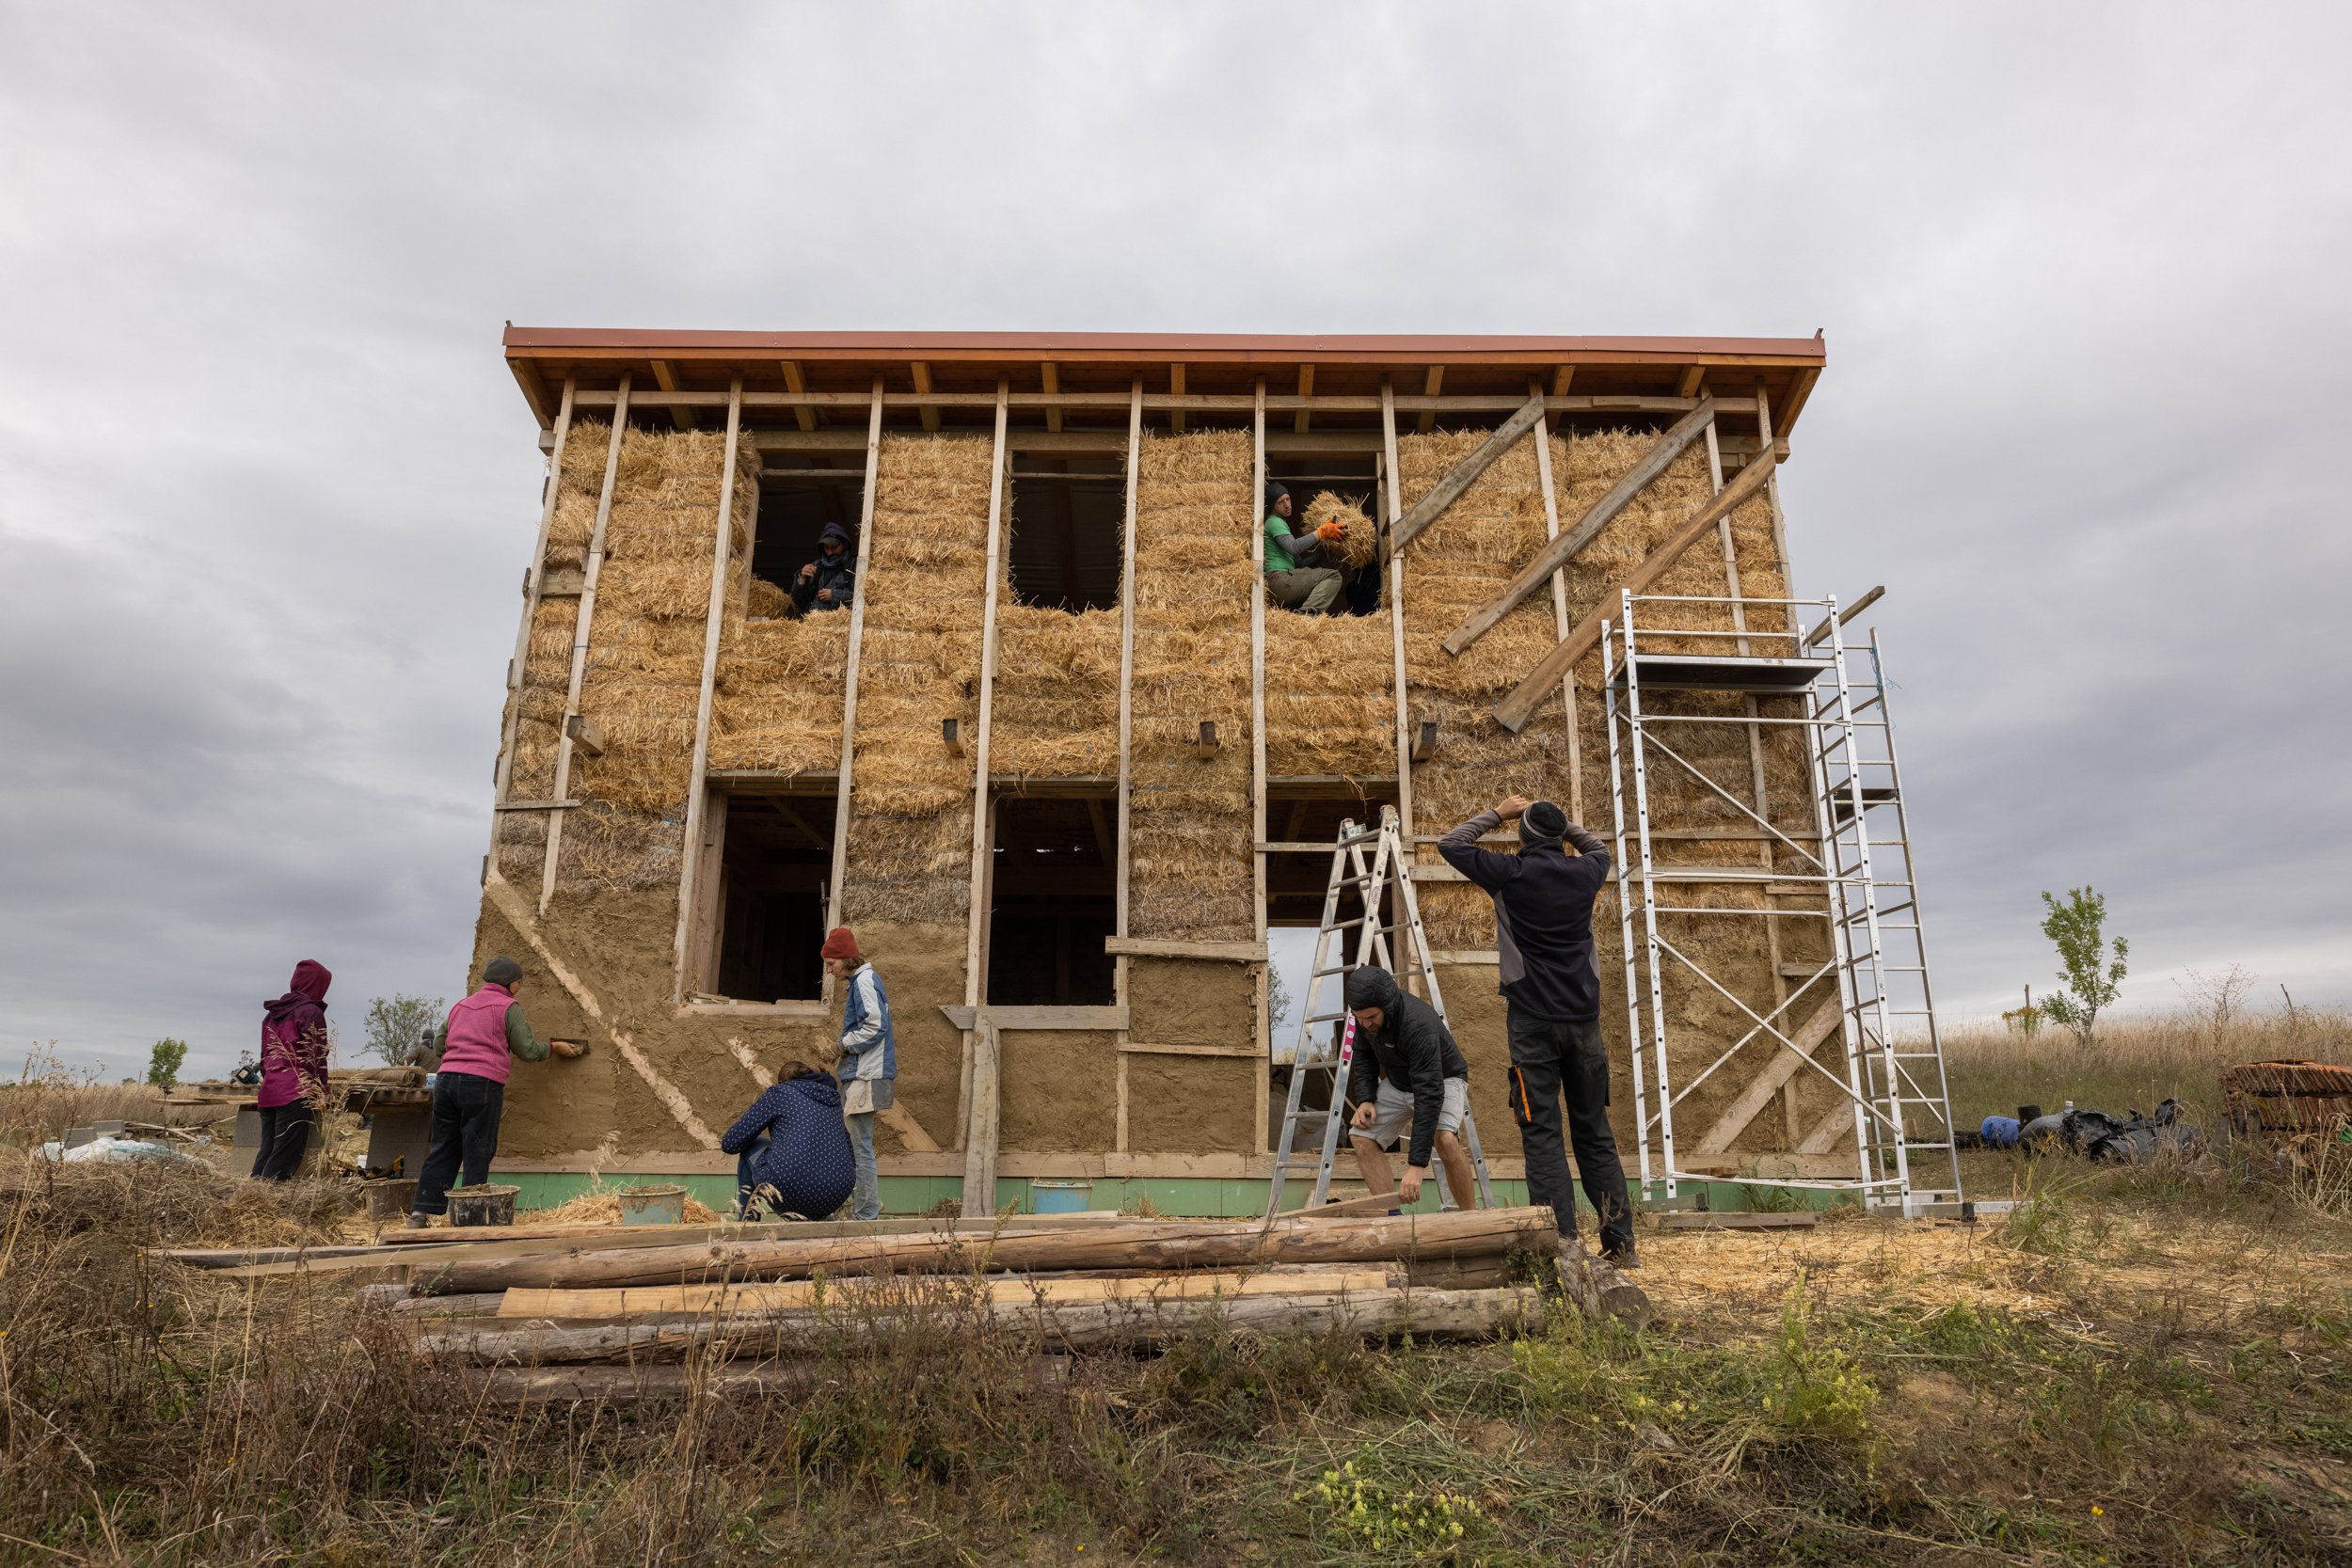  Straw-bale house under construction in Nyim on September 25, 2022. The residential building was designed by Gabriella Révész, president of the Hungarian Strawbale-Building Association, considering the needs and ideas of the community. They build it 